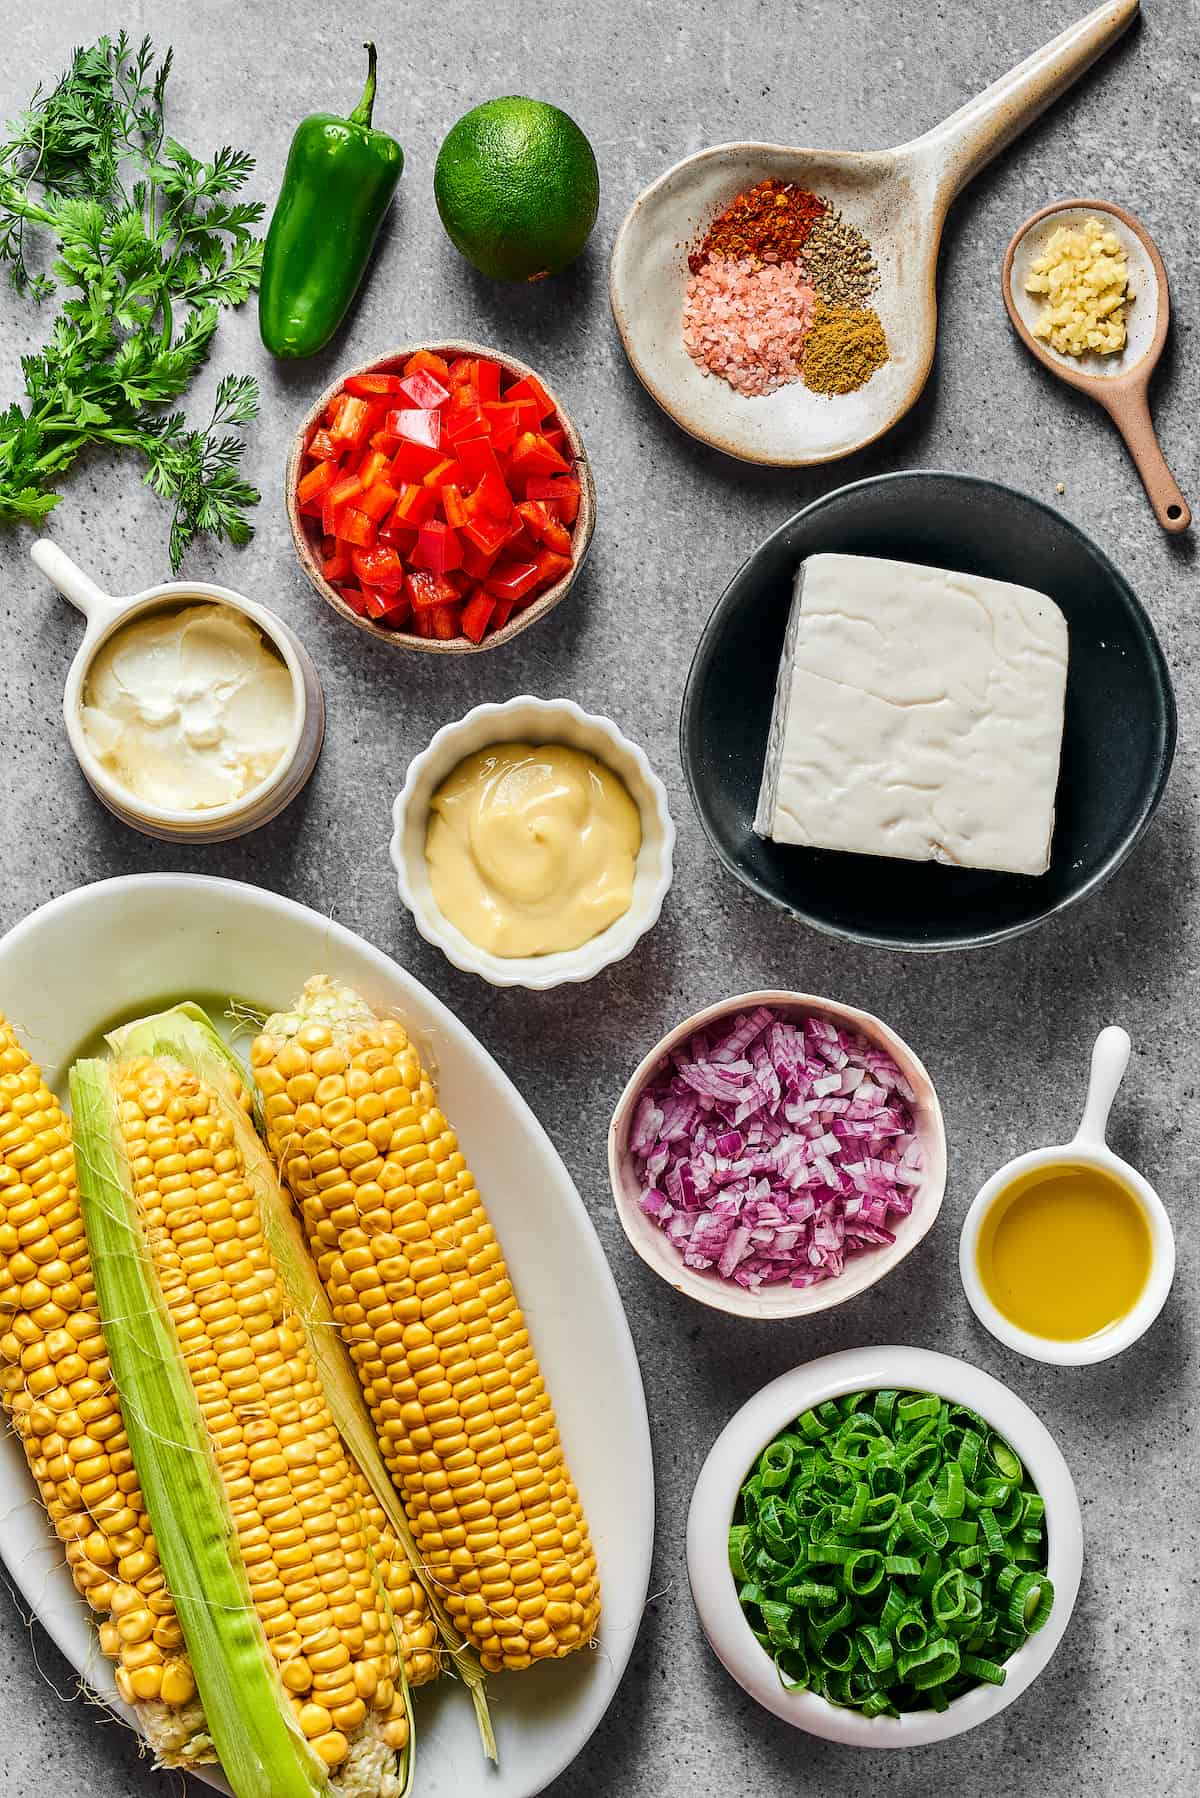 From top left: Cilantro, jalapeno, spices, minced garlic, sour cream, red bell pepper, mayonnaise, goat cheese, fresh corn, red onion, olive oil, chopped green onion.